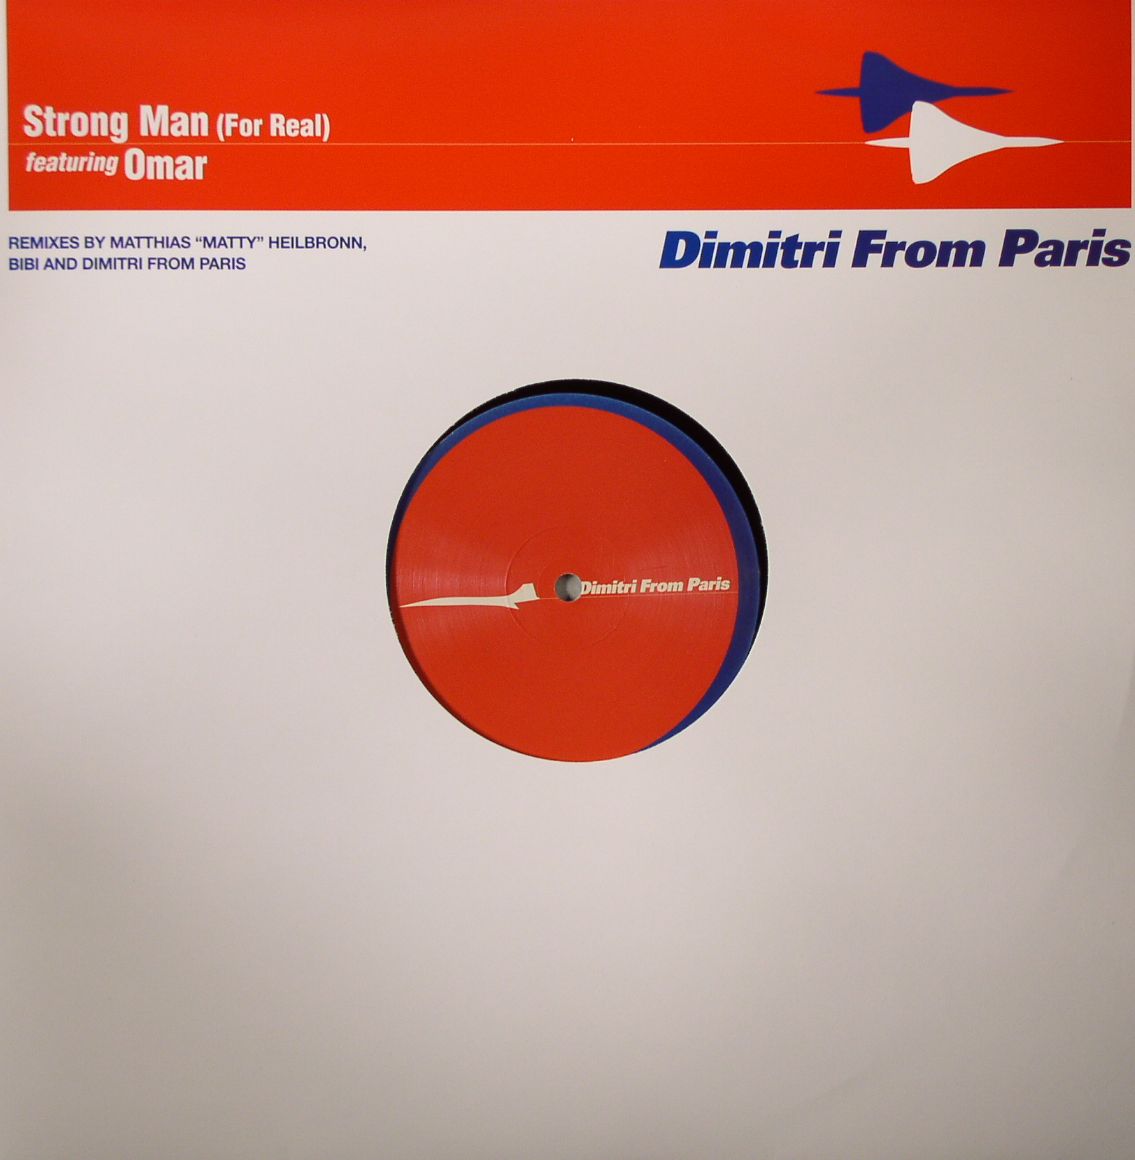 DIMITRI FROM PARIS feat OMAR - Strong Man (For Real)